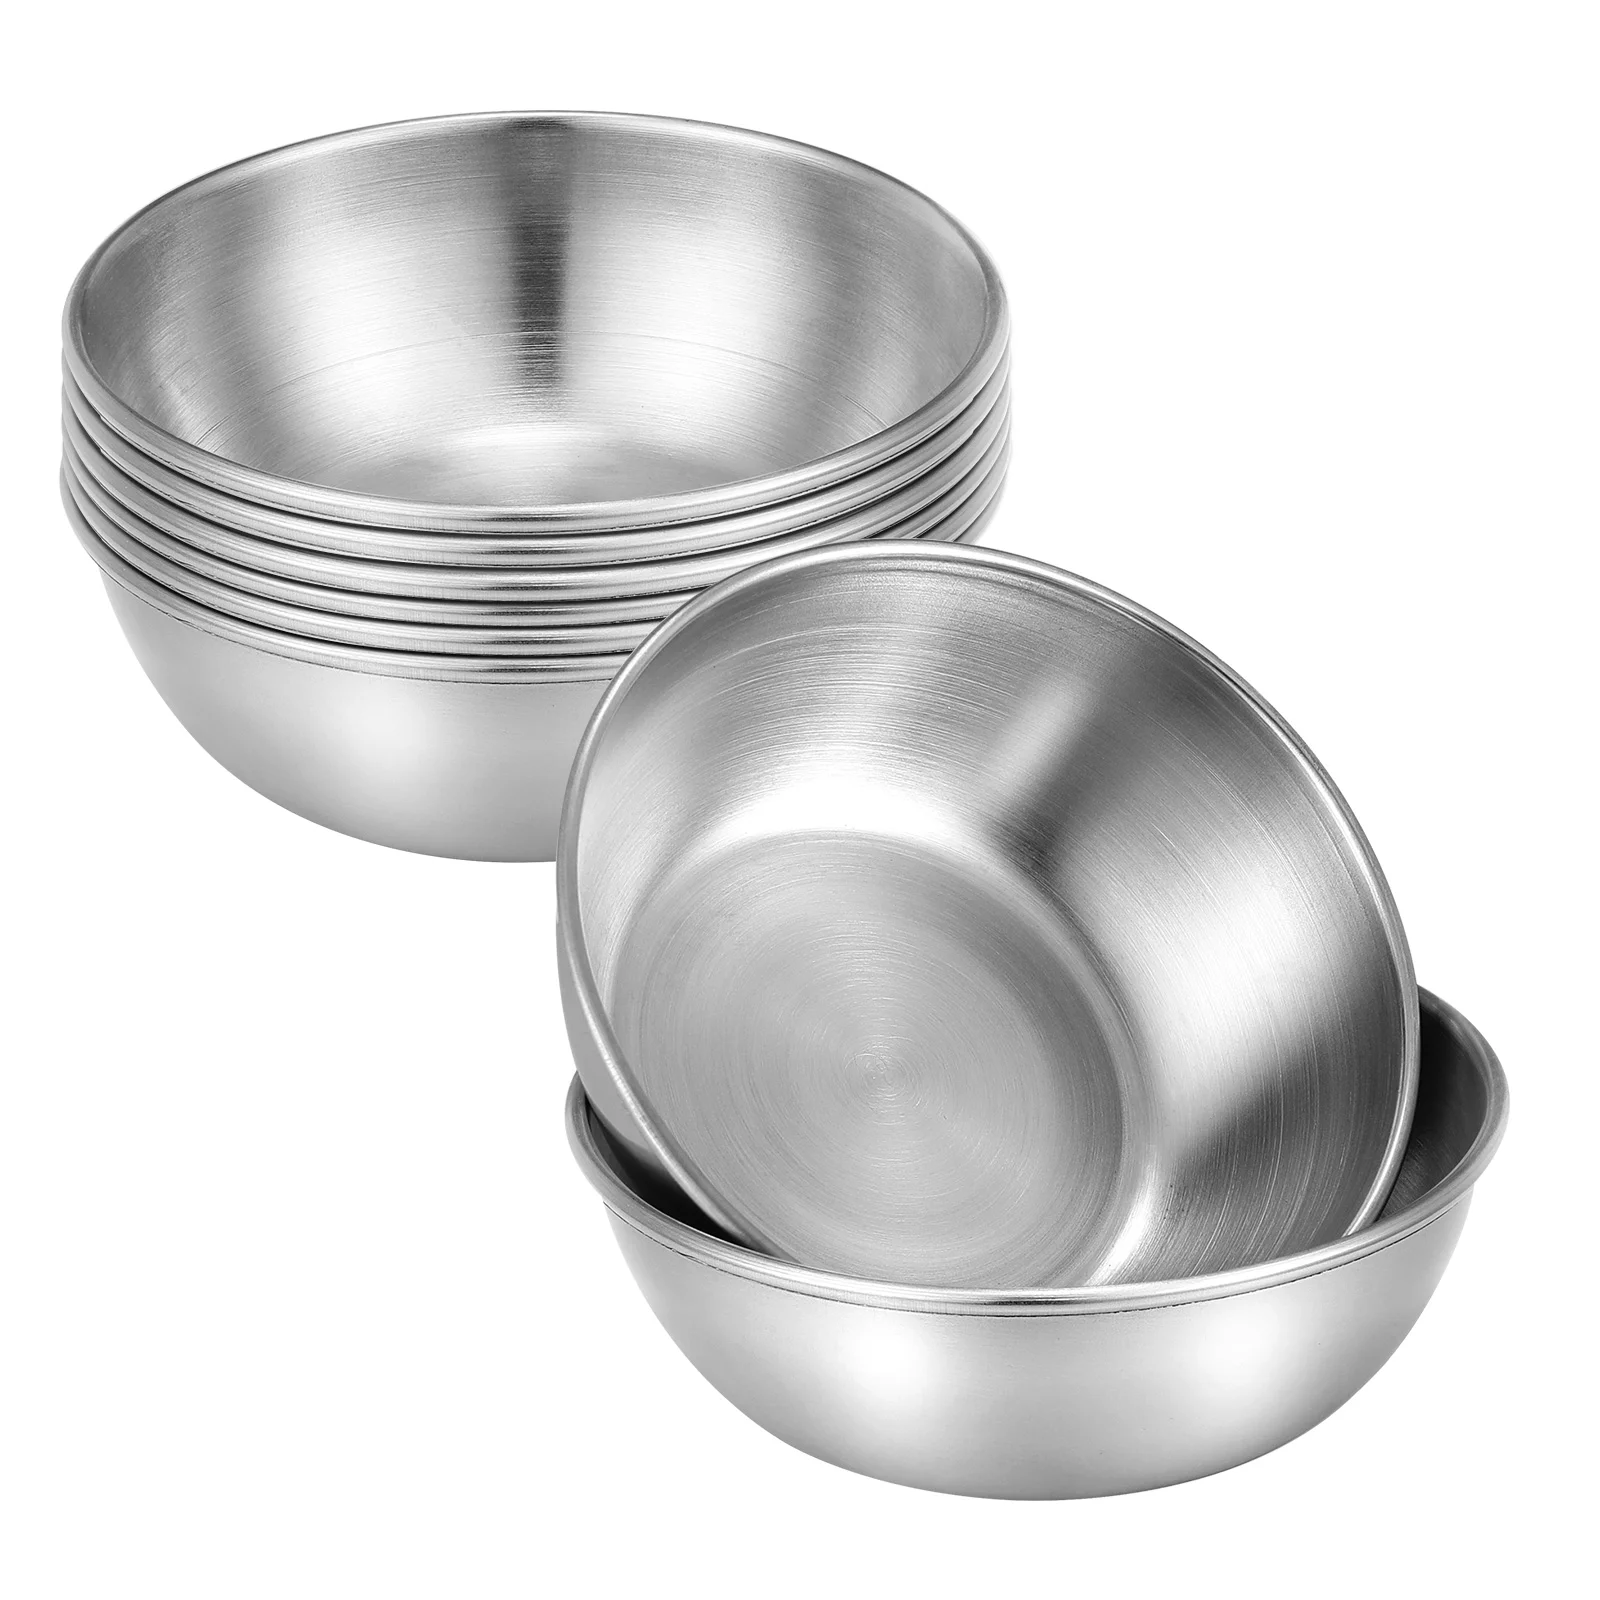 

8Pcs Dipping Bowls Stainless Steel Sauce Dishes Round Seasoning Dish Saucer Appetizer Serving Plates for Restaurant Home